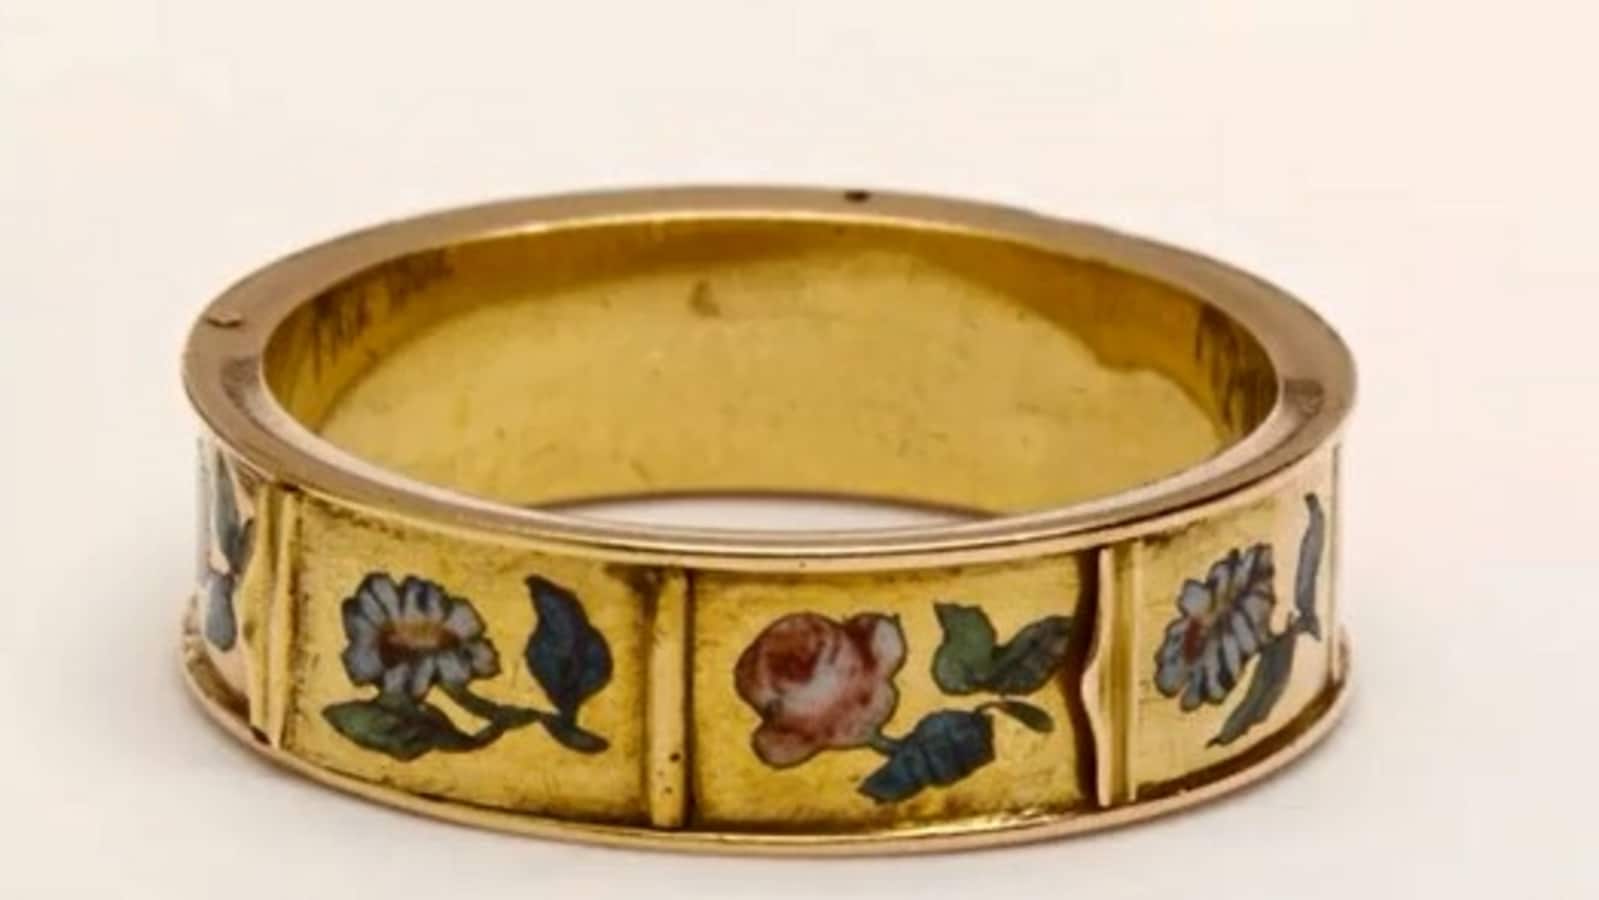 ‘Lover’s gift’: Gold ring from around 1860 has doors that reveal secret inscriptions. Watch